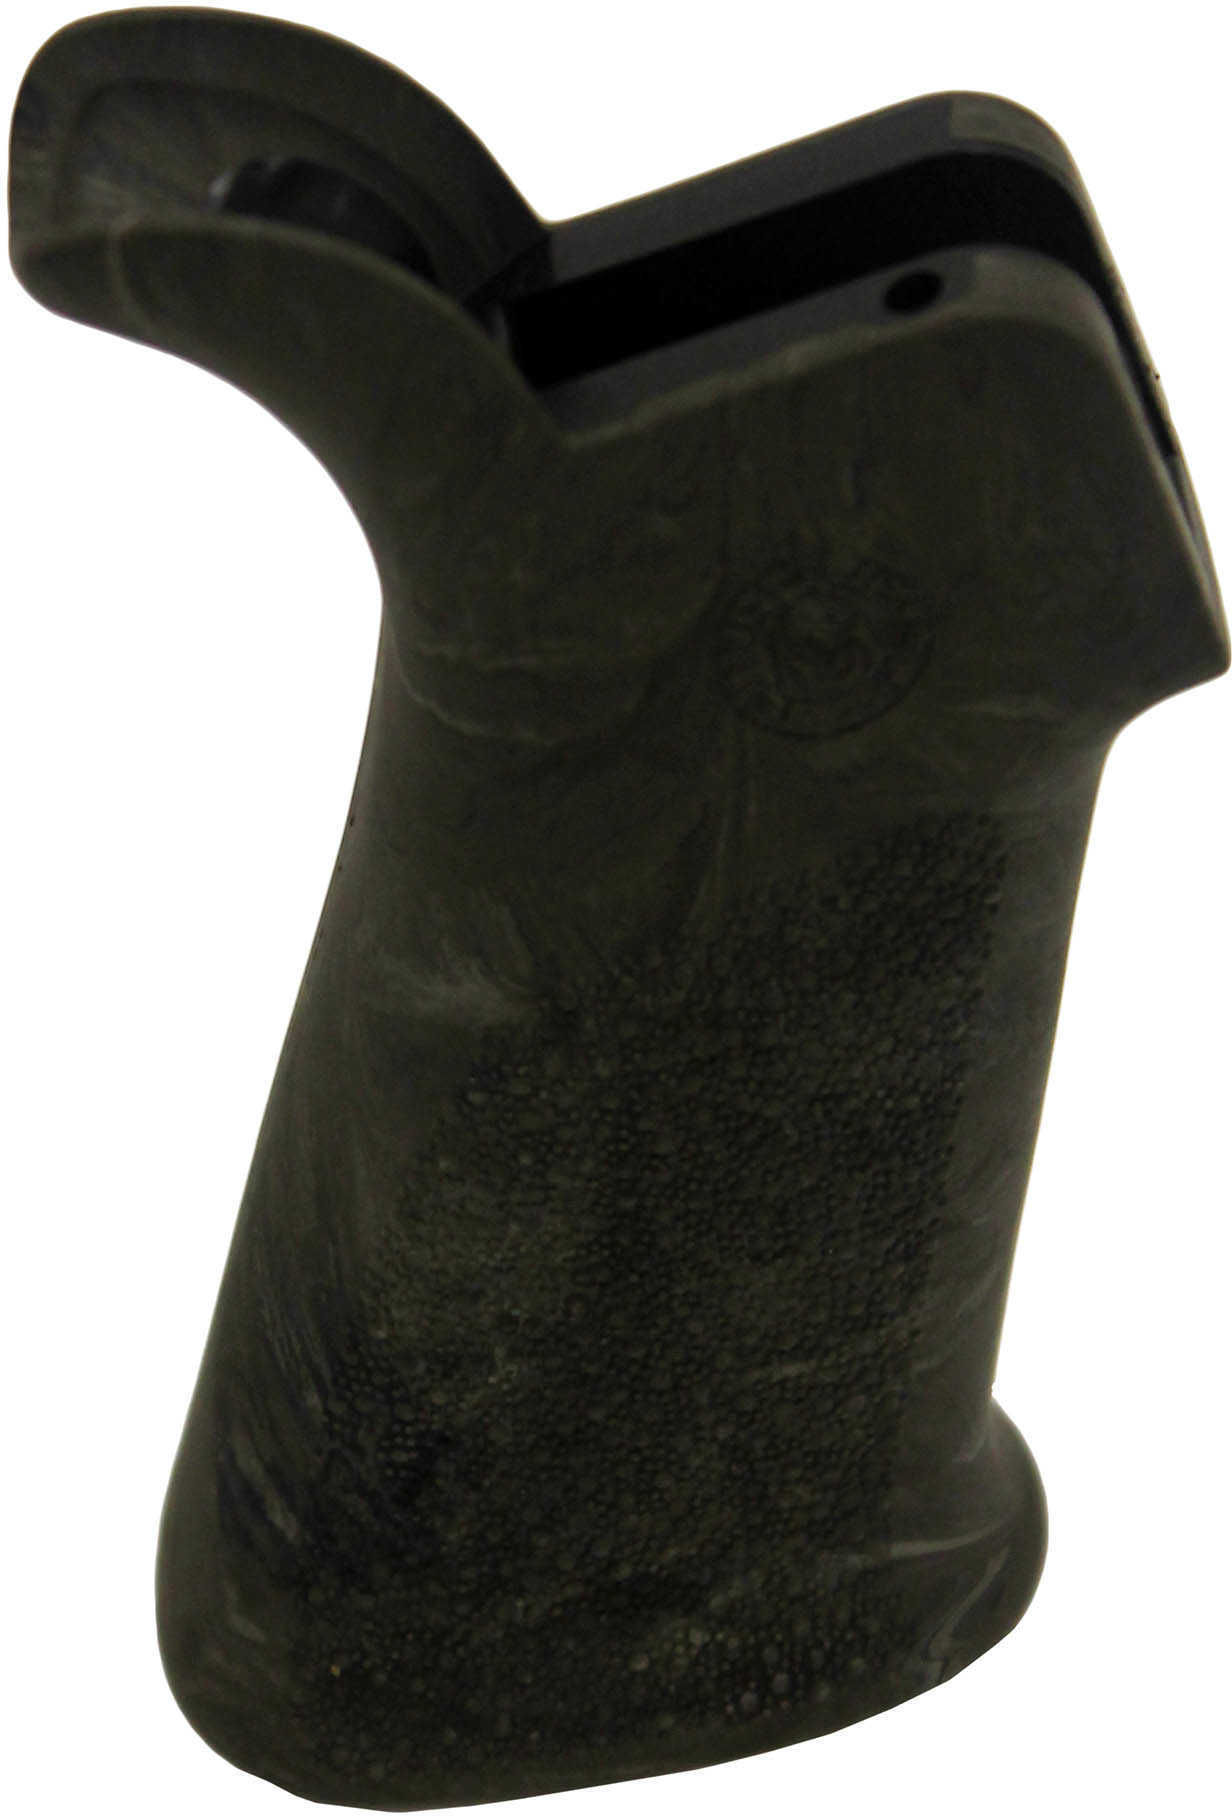 Hogue AR15 Rubber Grip BNF Ghillie Green Md: 15831